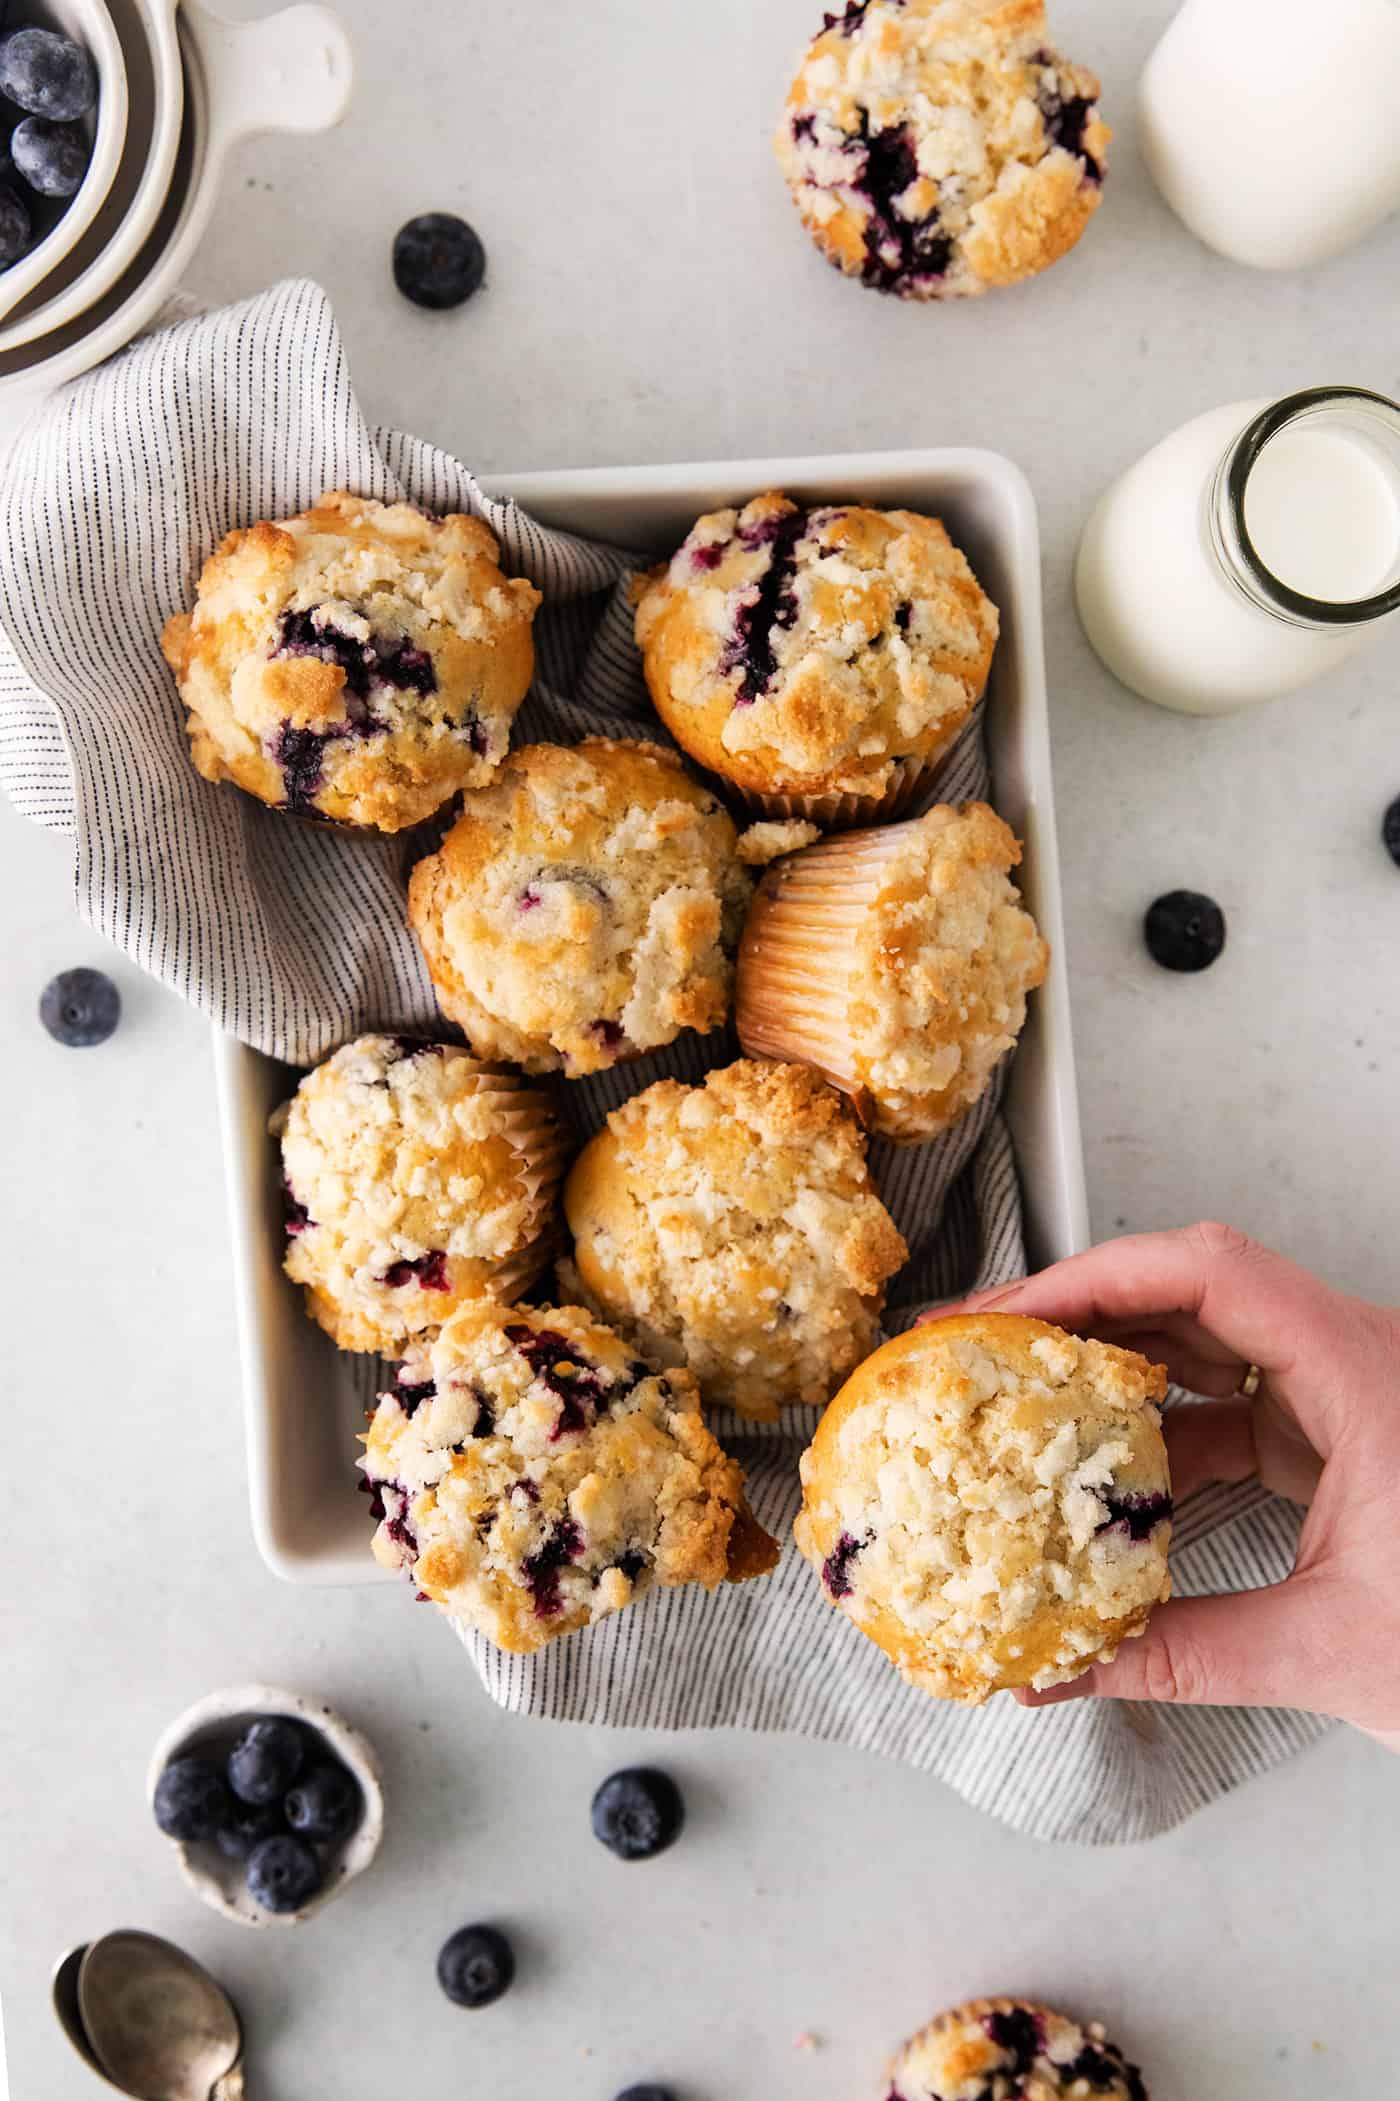 Overhead view blueberry muffins with a hand holding one